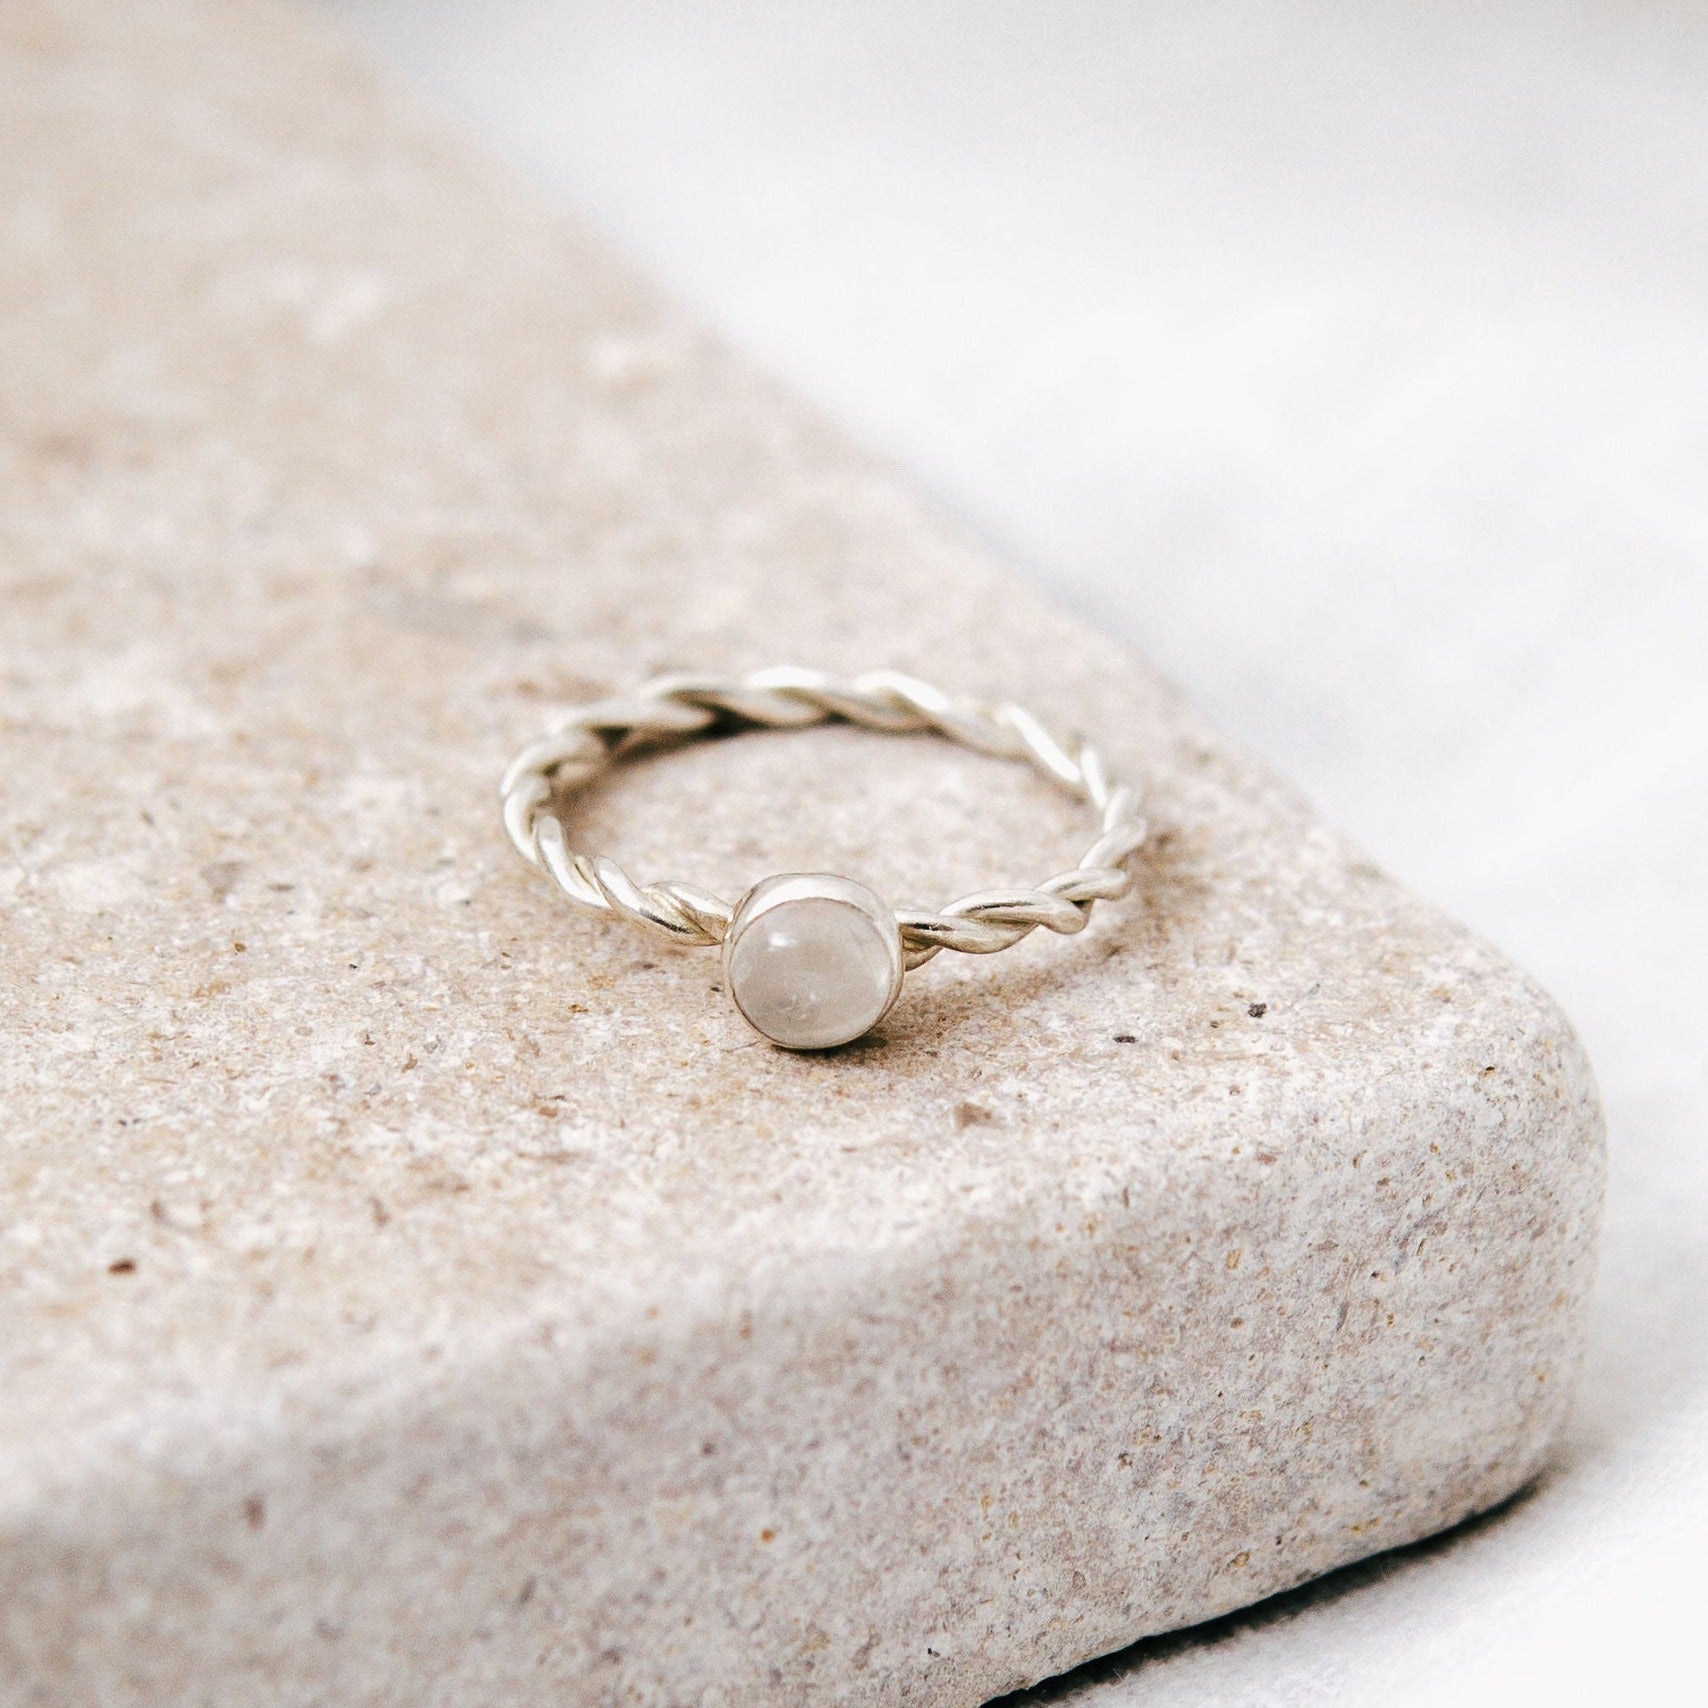 Moonstone Forever Entwined Silver Ring